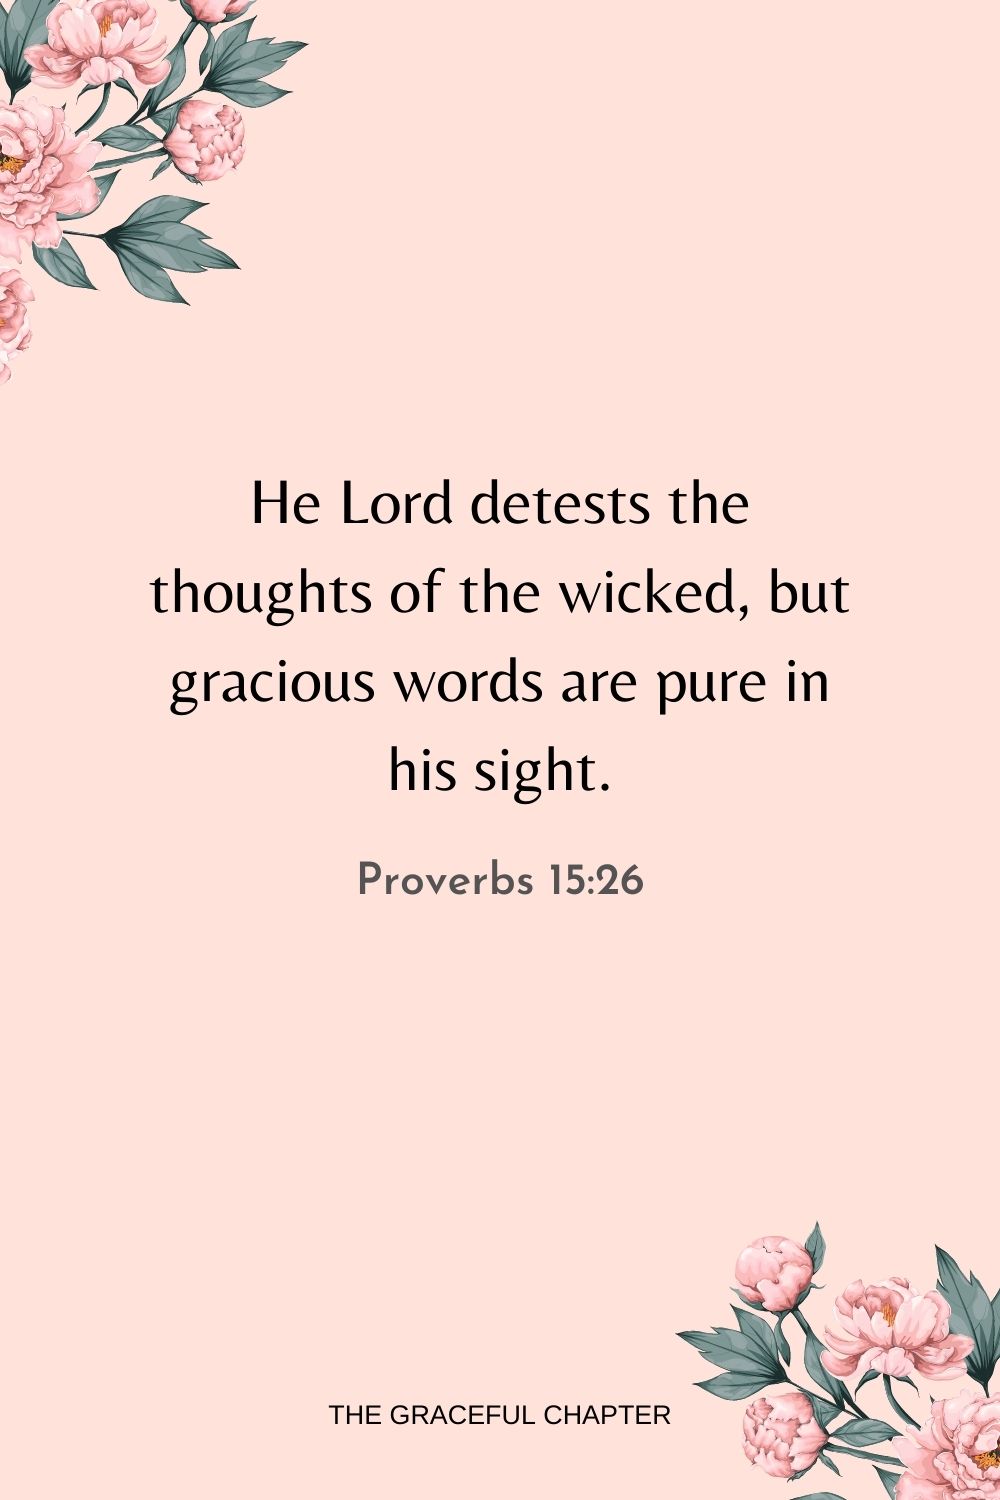 He Lord detests the thoughts of the wicked, but gracious words are pure in his sight. Proverbs 15:26